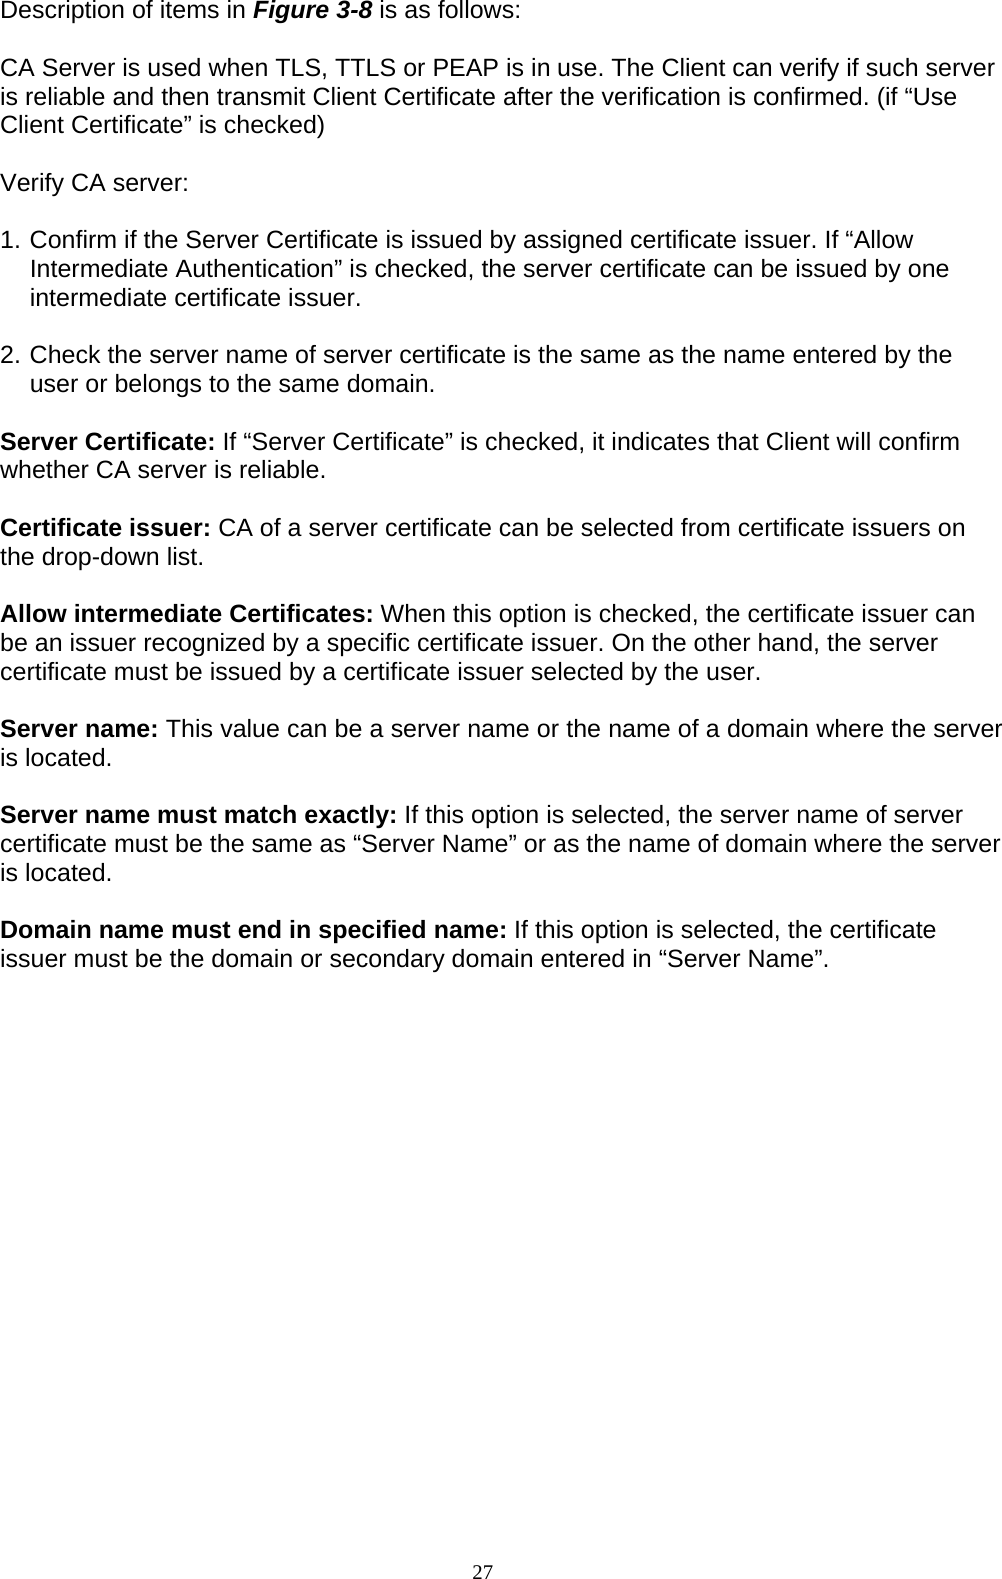 Description of items in Figure 3-8 is as follows:  CA Server is used when TLS, TTLS or PEAP is in use. The Client can verify if such server is reliable and then transmit Client Certificate after the verification is confirmed. (if “Use Client Certificate” is checked)  Verify CA server:  1. Confirm if the Server Certificate is issued by assigned certificate issuer. If “Allow Intermediate Authentication” is checked, the server certificate can be issued by one intermediate certificate issuer.  2. Check the server name of server certificate is the same as the name entered by the user or belongs to the same domain.  Server Certificate: If “Server Certificate” is checked, it indicates that Client will confirm whether CA server is reliable.  Certificate issuer: CA of a server certificate can be selected from certificate issuers on the drop-down list.  Allow intermediate Certificates: When this option is checked, the certificate issuer can be an issuer recognized by a specific certificate issuer. On the other hand, the server certificate must be issued by a certificate issuer selected by the user.  Server name: This value can be a server name or the name of a domain where the server is located.  Server name must match exactly: If this option is selected, the server name of server certificate must be the same as “Server Name” or as the name of domain where the server is located.  Domain name must end in specified name: If this option is selected, the certificate issuer must be the domain or secondary domain entered in “Server Name”.  27   